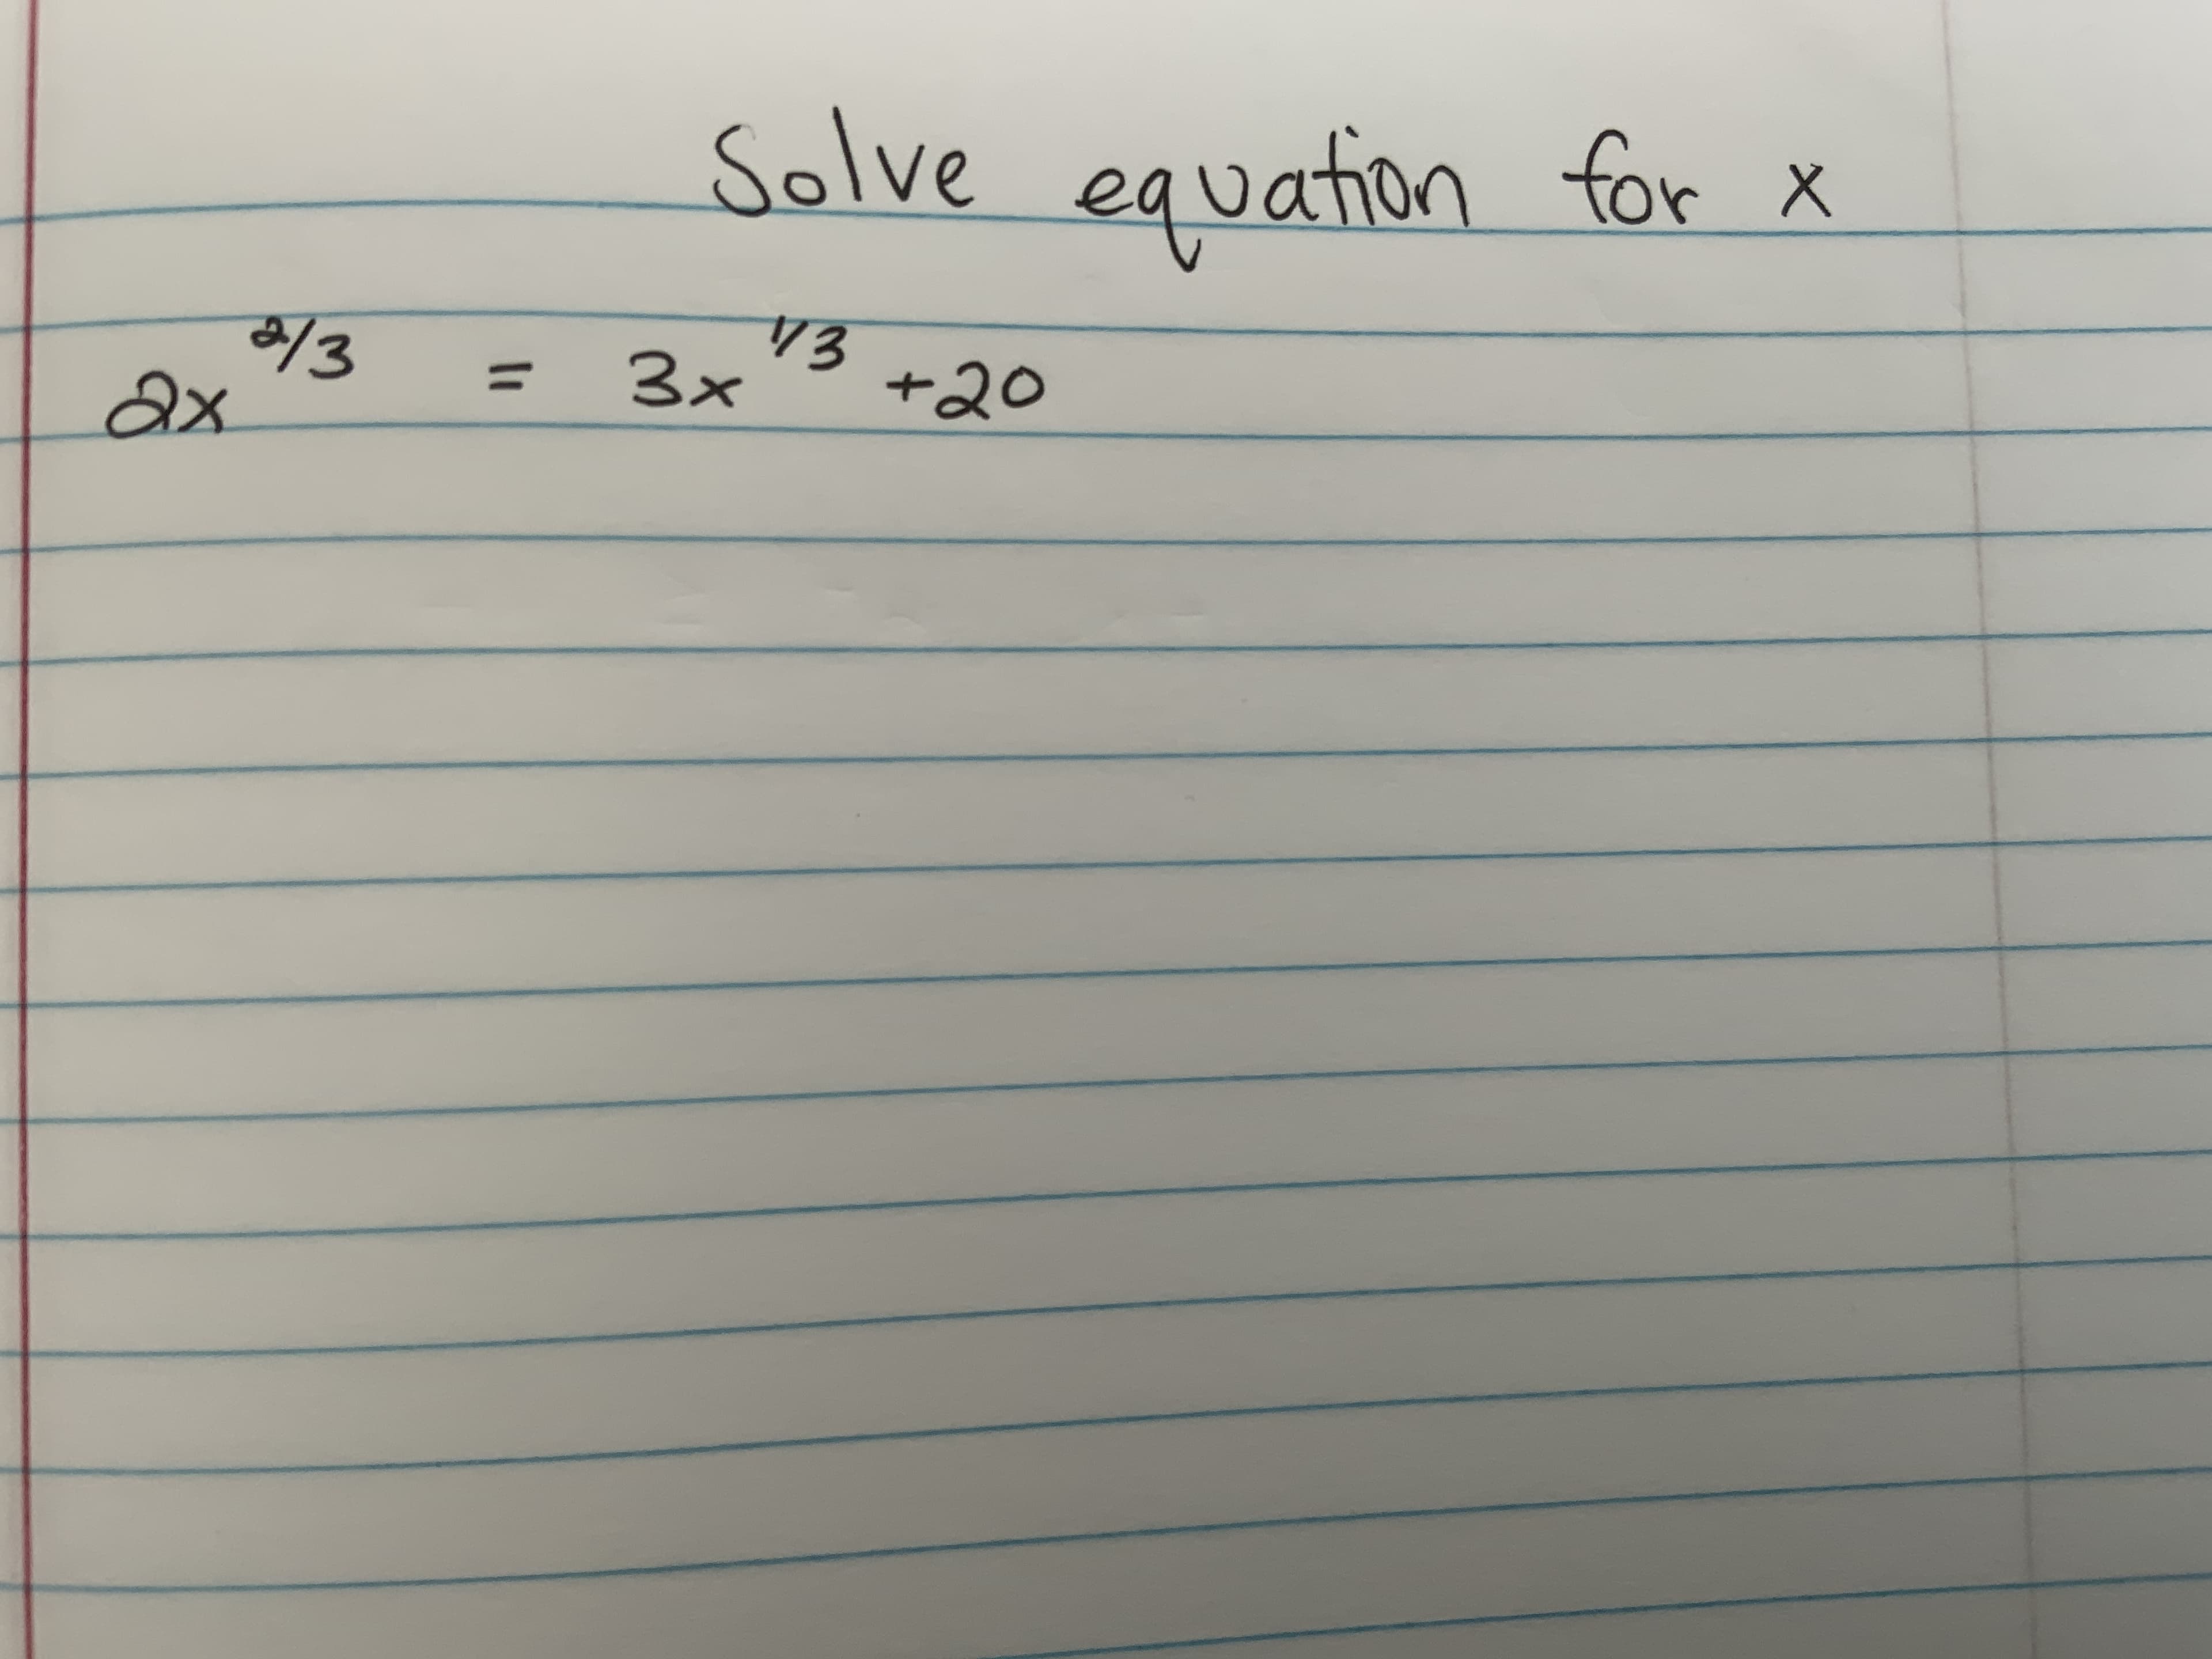 Solve equation for X
E3
ax.
3x
%3D
/3
+20
